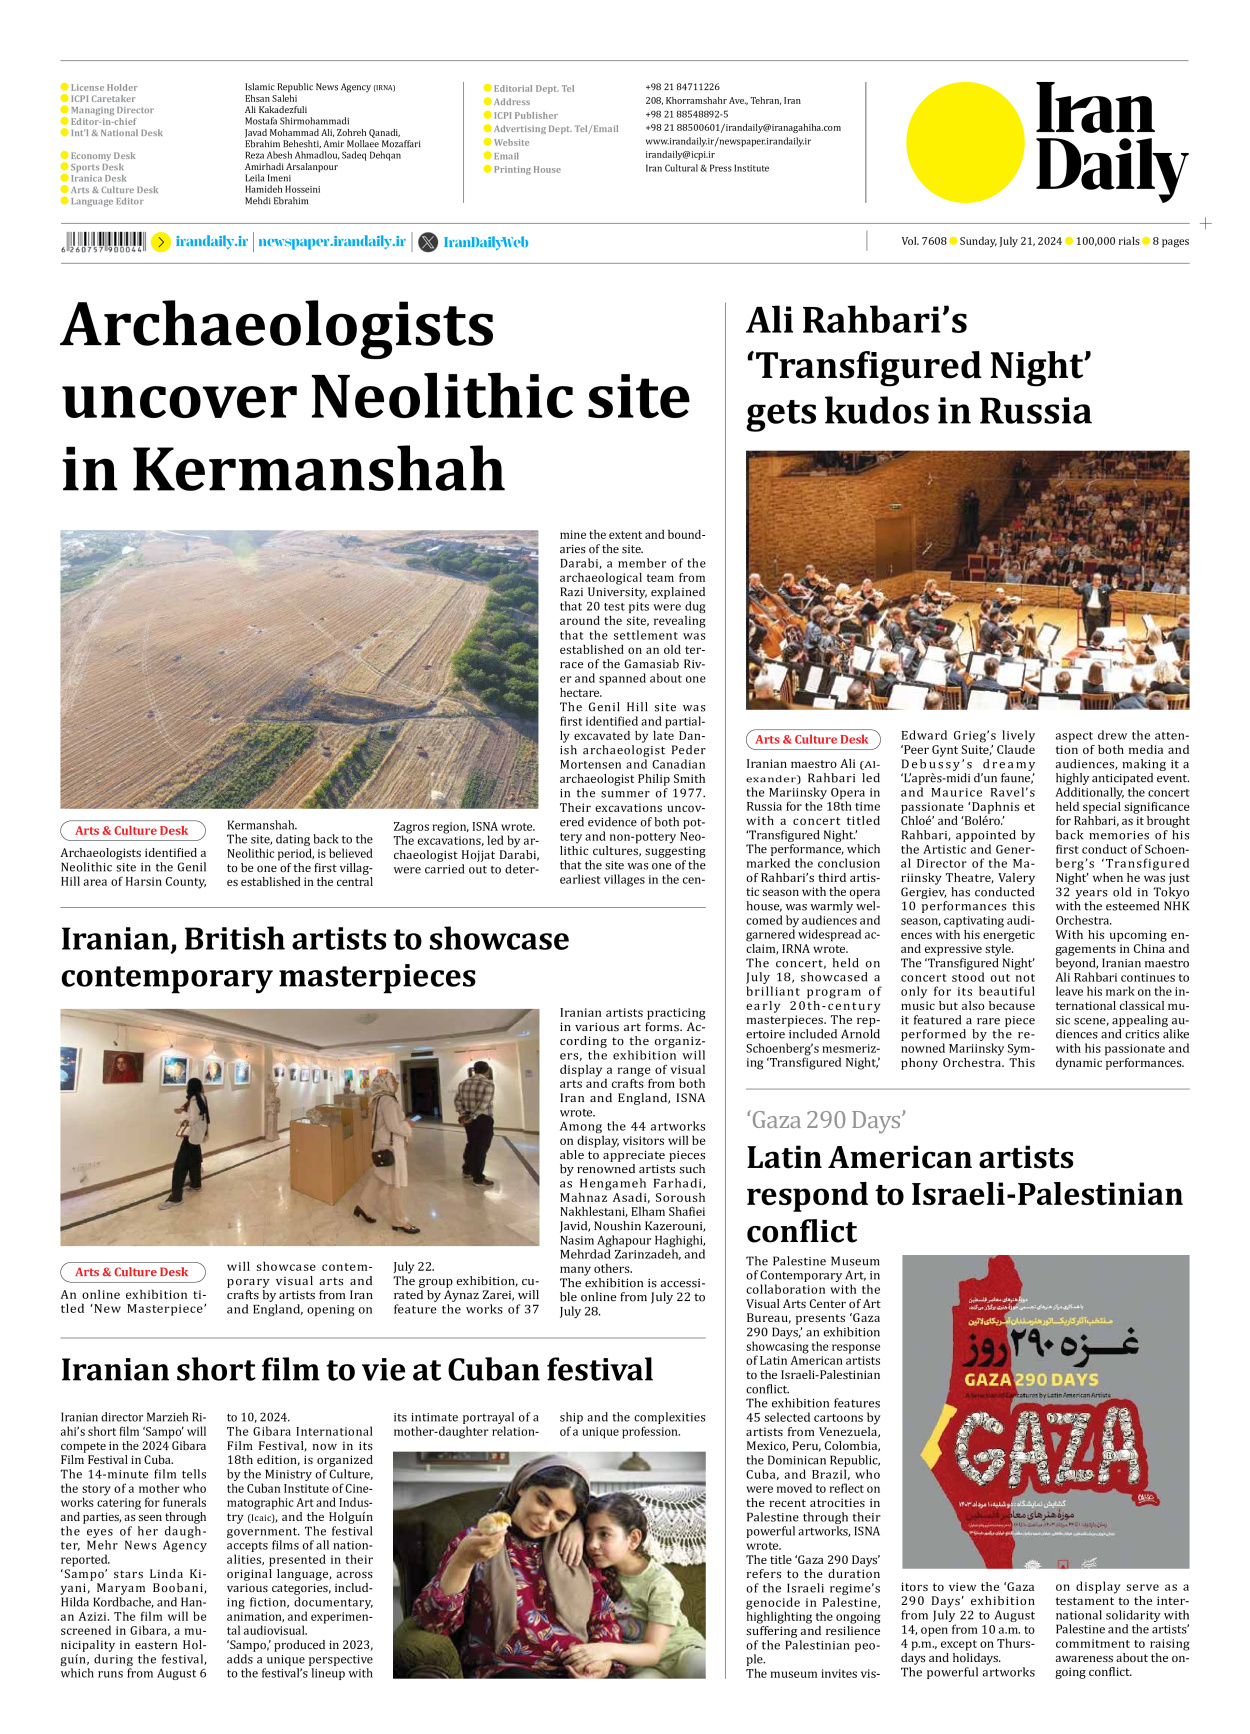 Iran Daily - Number Seven Thousand Six Hundred and Eight - 21 July 2024 - Page 8